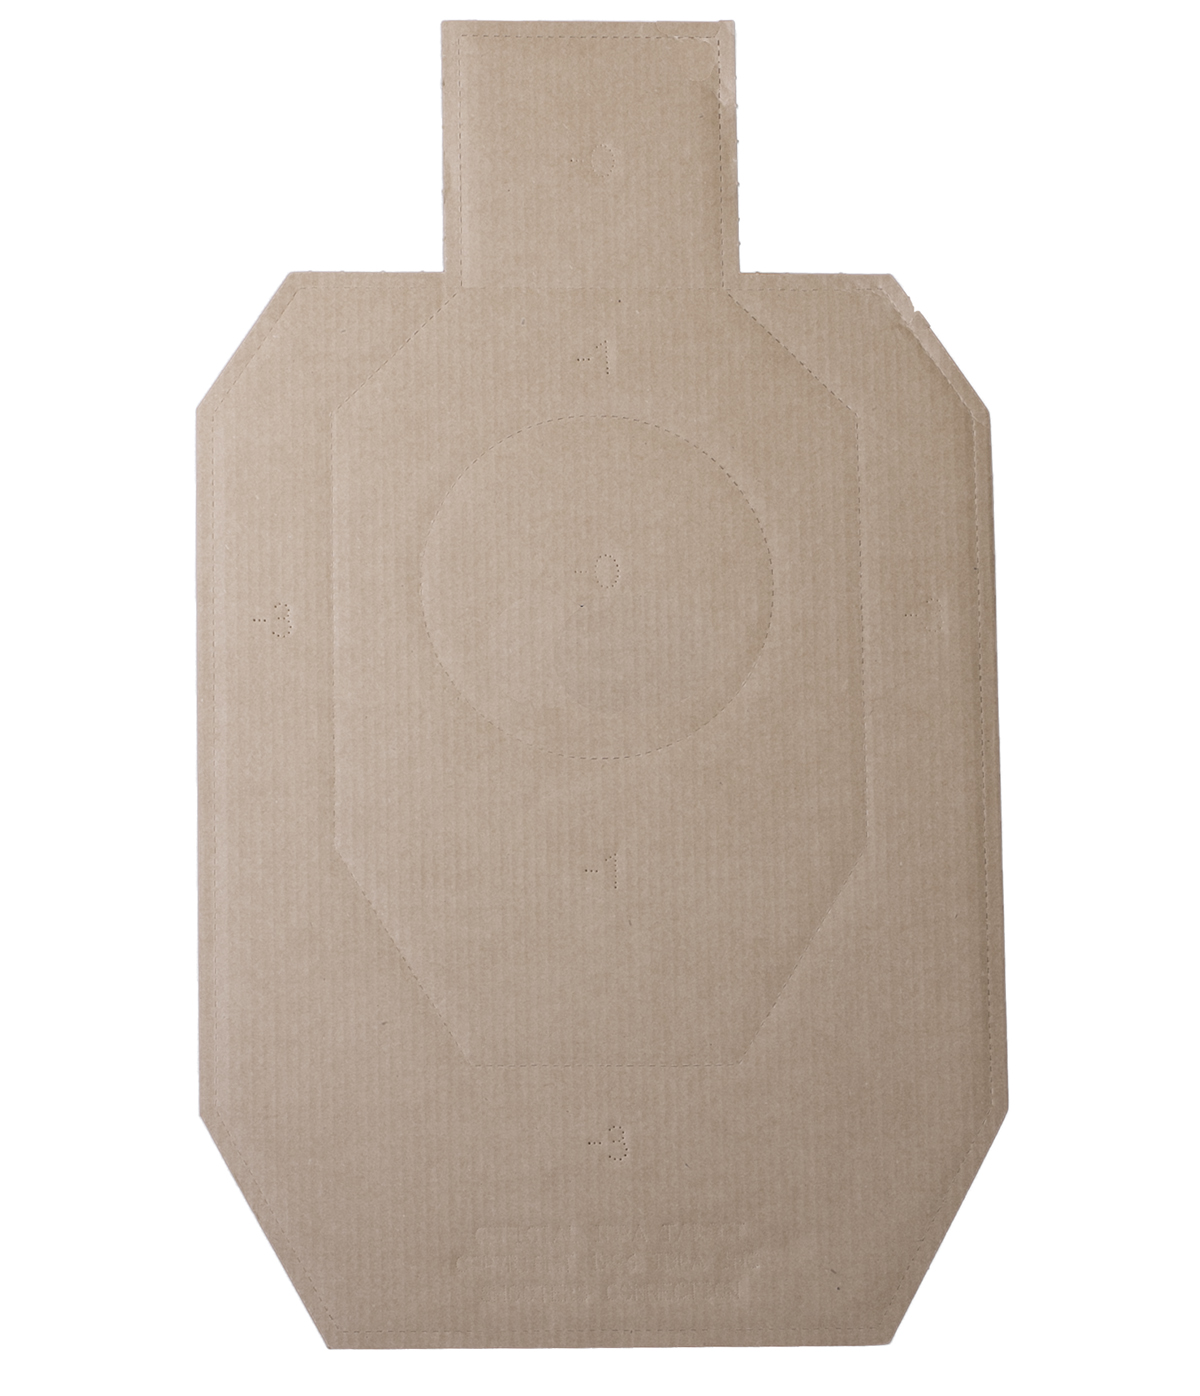 idpa-official-licensed-targets-new